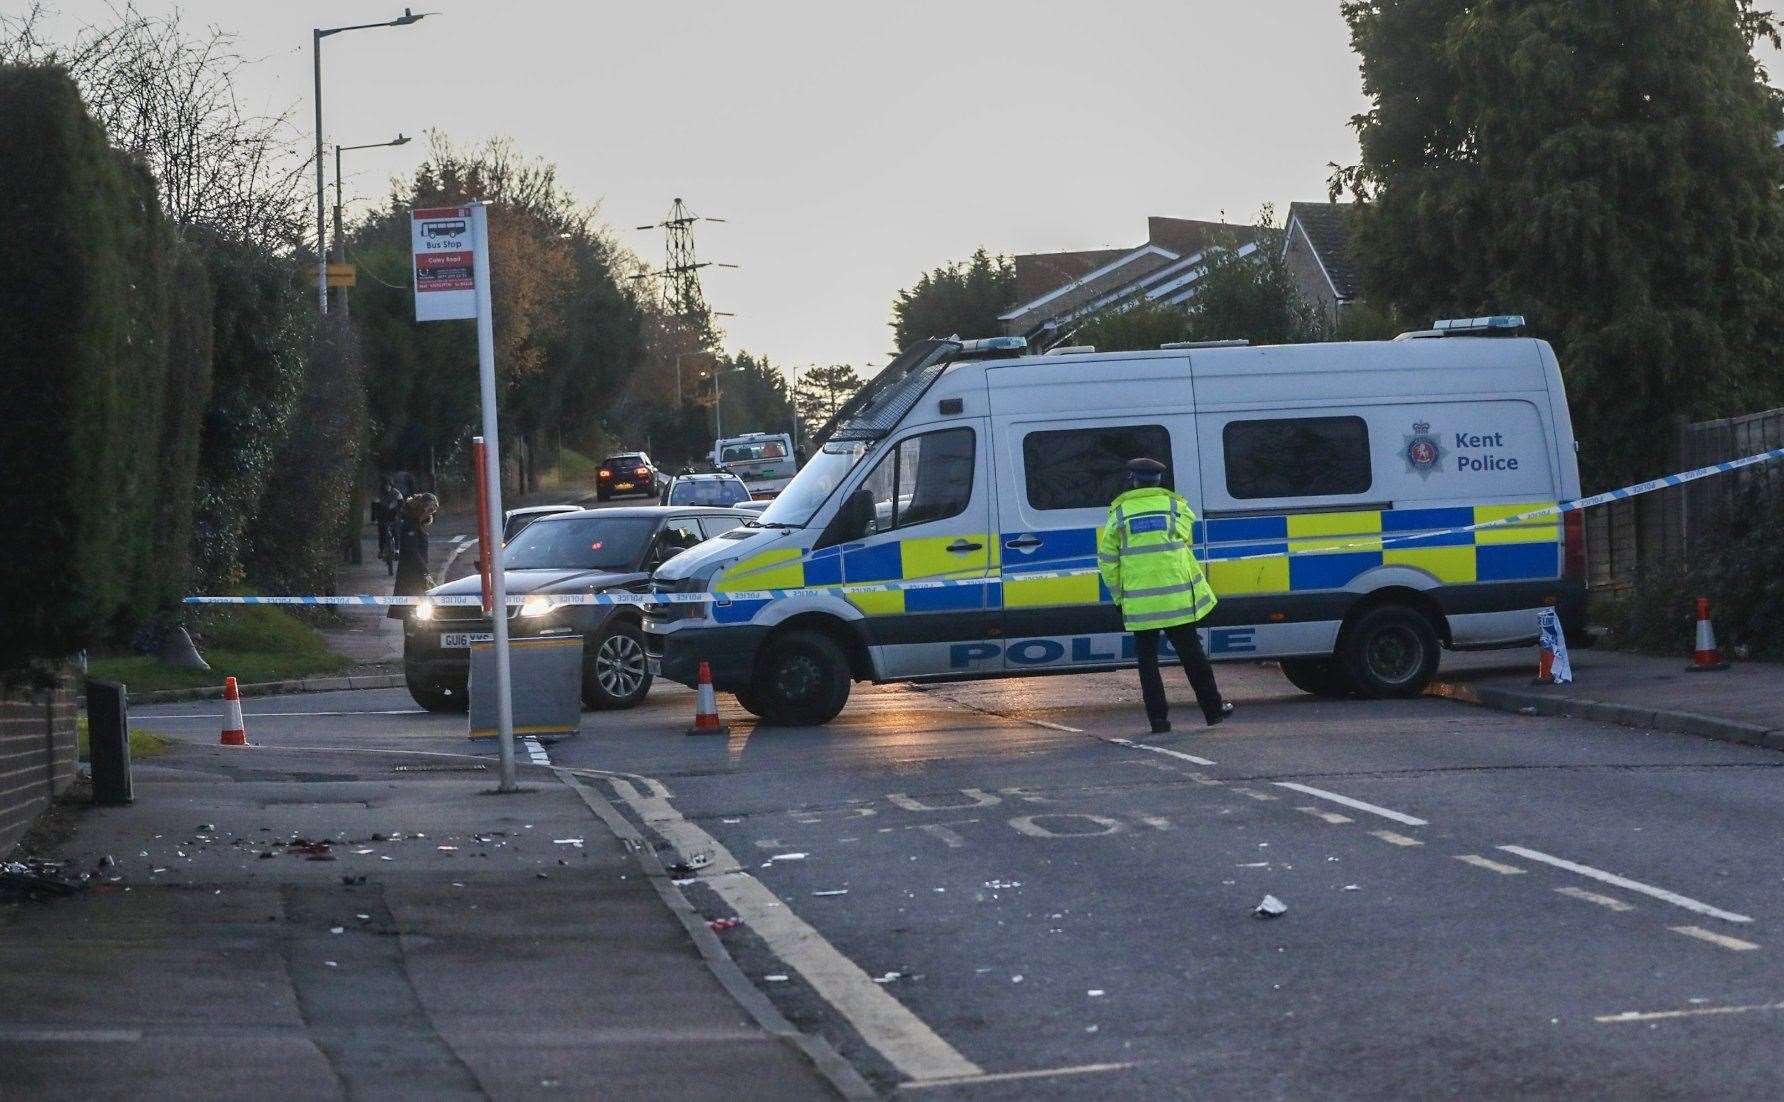 Police at the scene in Caley Road, Tunbridge Wells. Picture: UKNIP